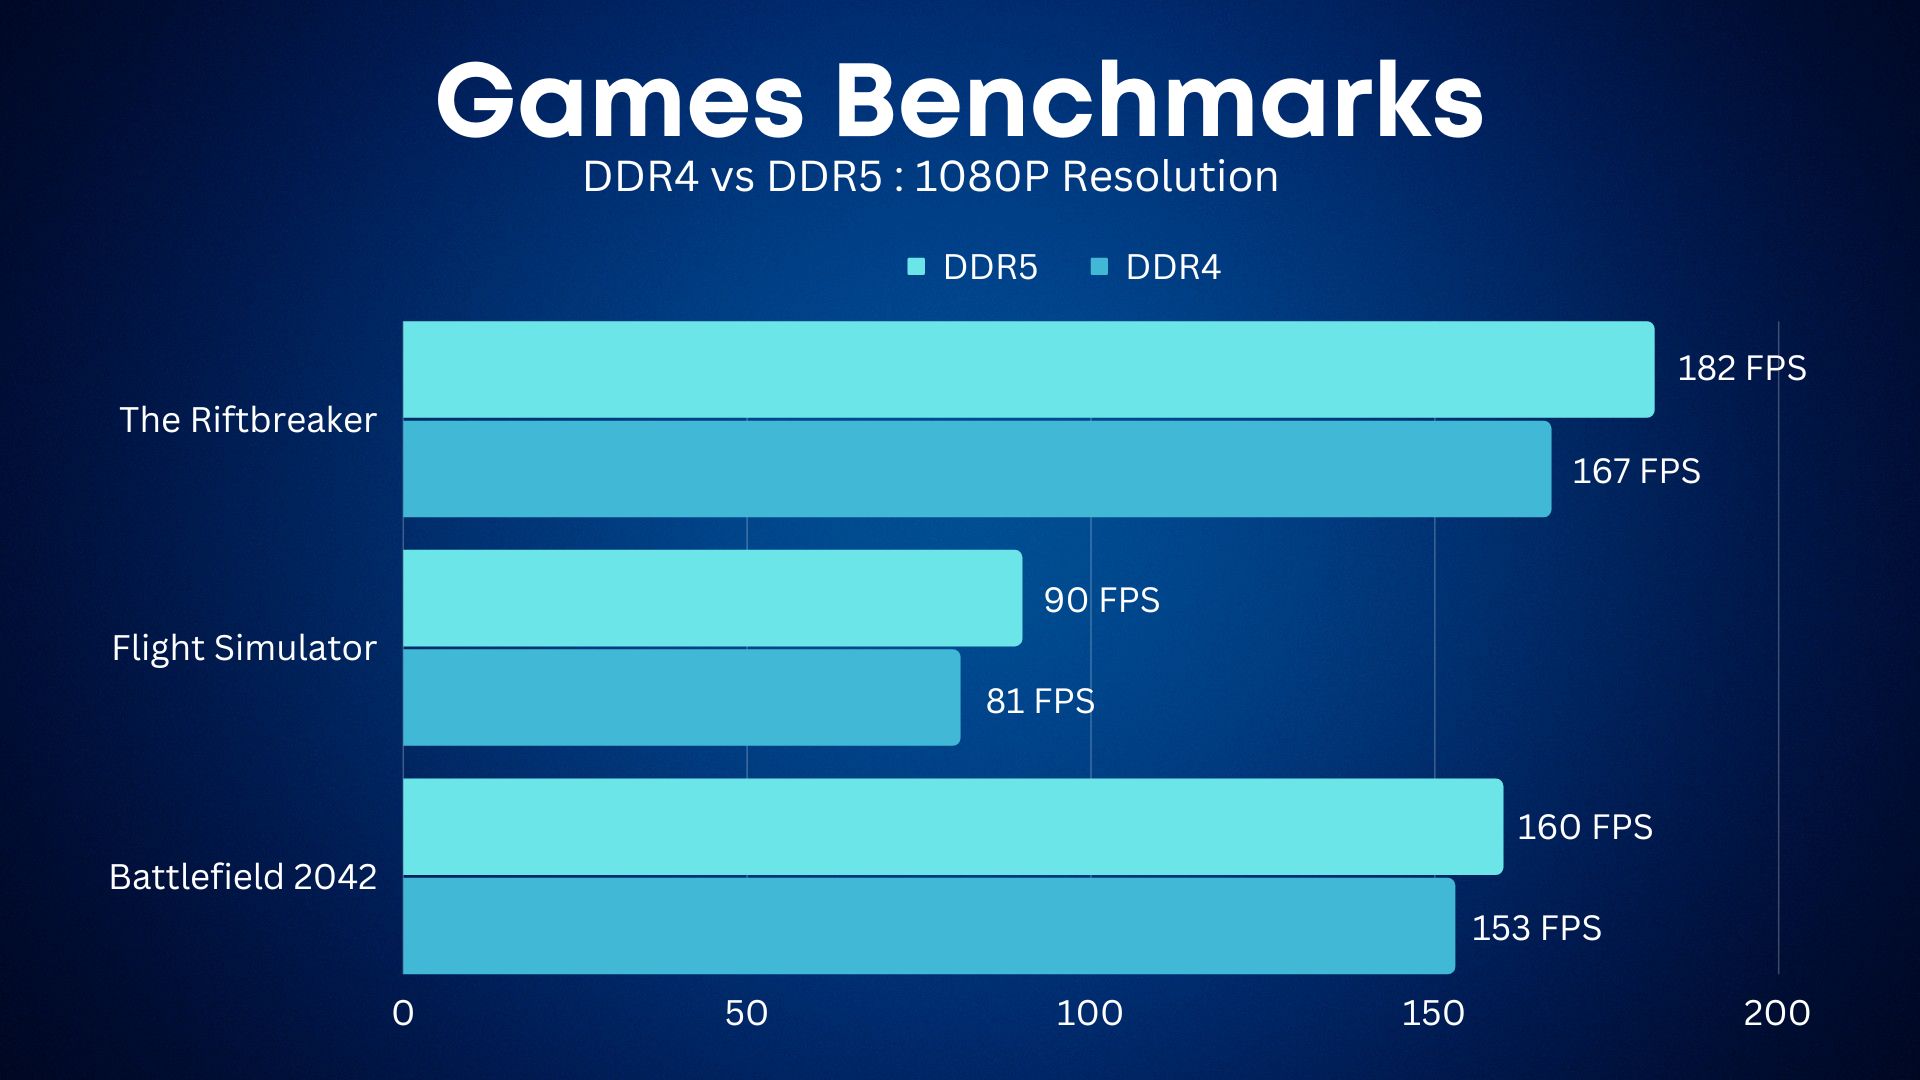 Games Benchmarks between DDR4 and DDR5 RAM